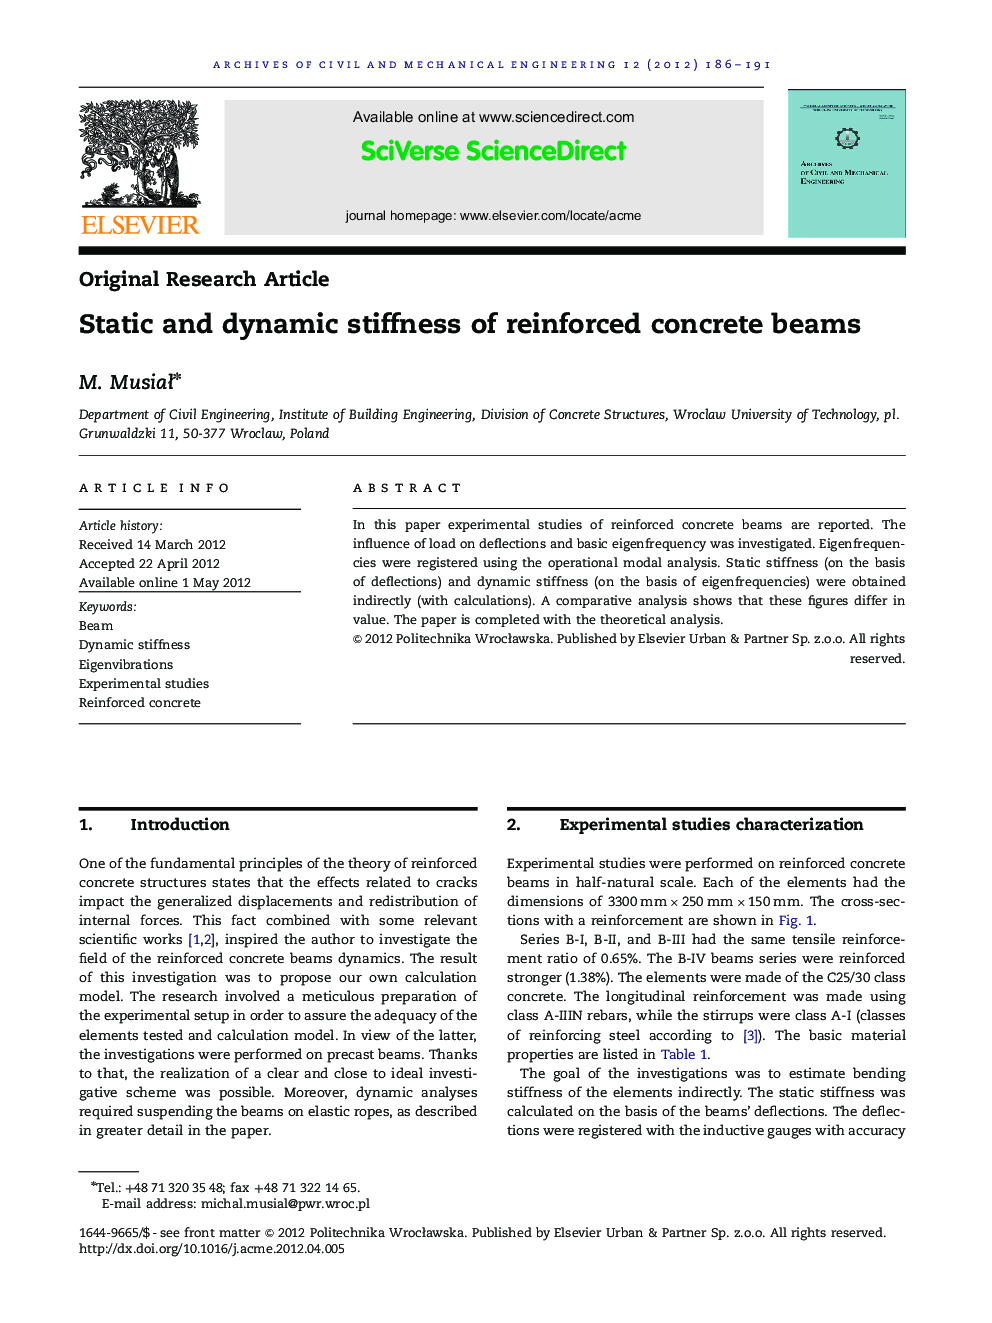 Static and dynamic stiffness of reinforced concrete beams